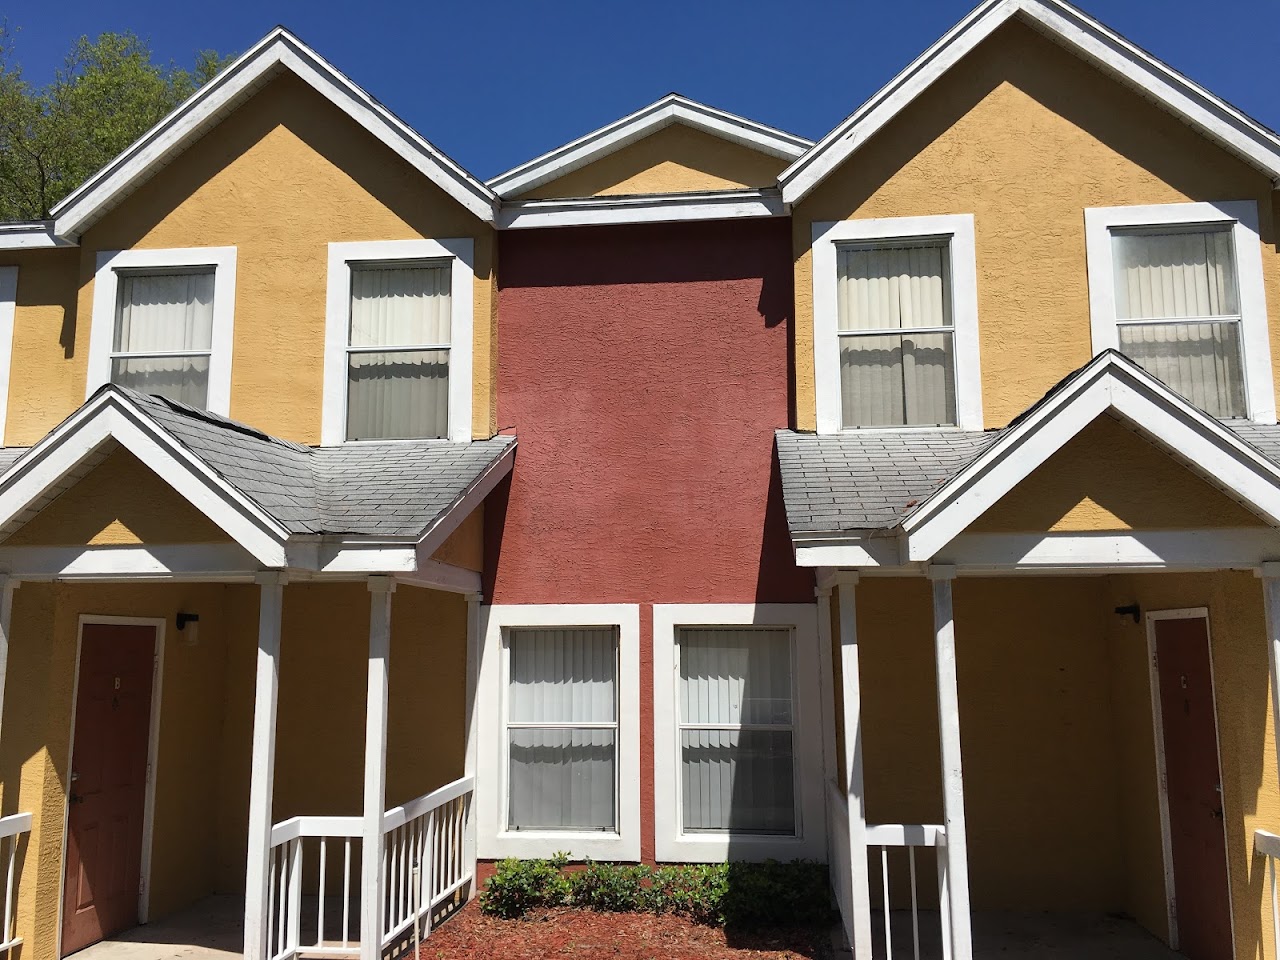 Photo of FOREST EDGE APTS. Affordable housing located at 2201 WESTON LN ORLANDO, FL 32810